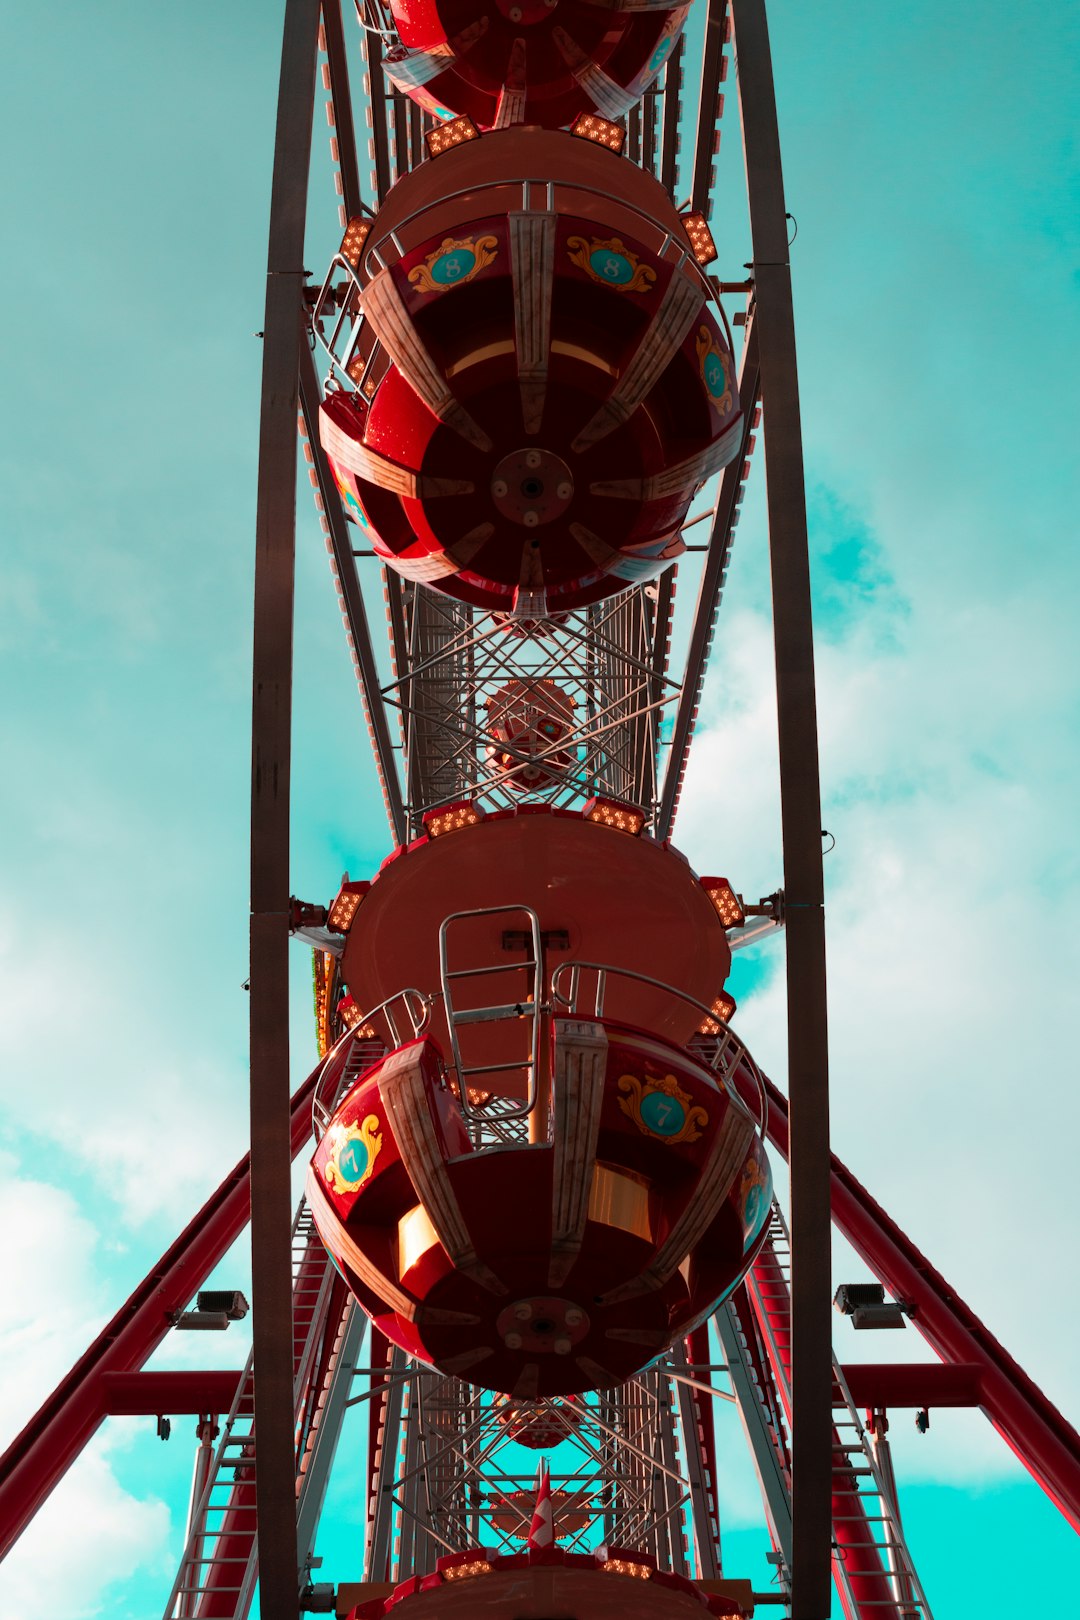 red and black ferris wheel under cloudy sky during daytime